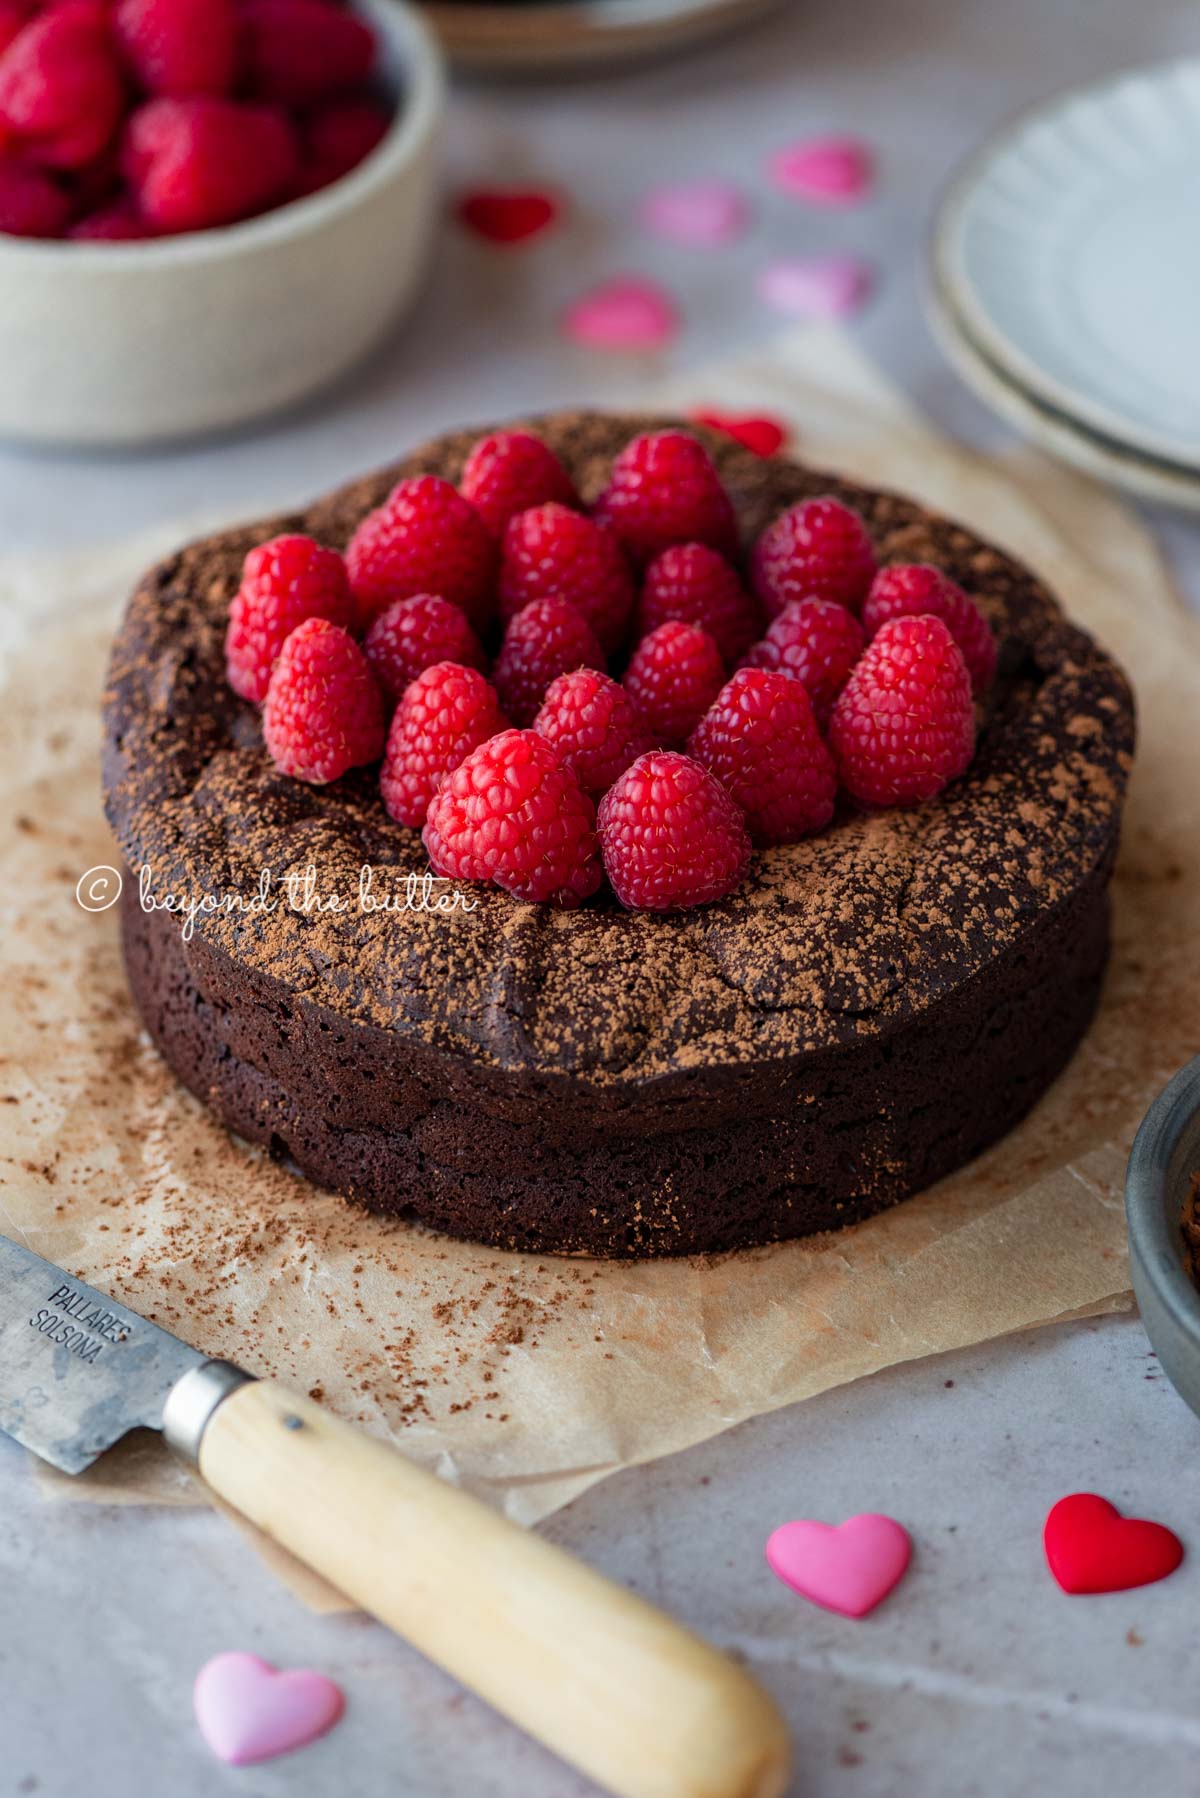 Small flourless chocolate cake topped with cocoa powder and fresh raspberries on parchment paper | All images © Beyond the Butter®